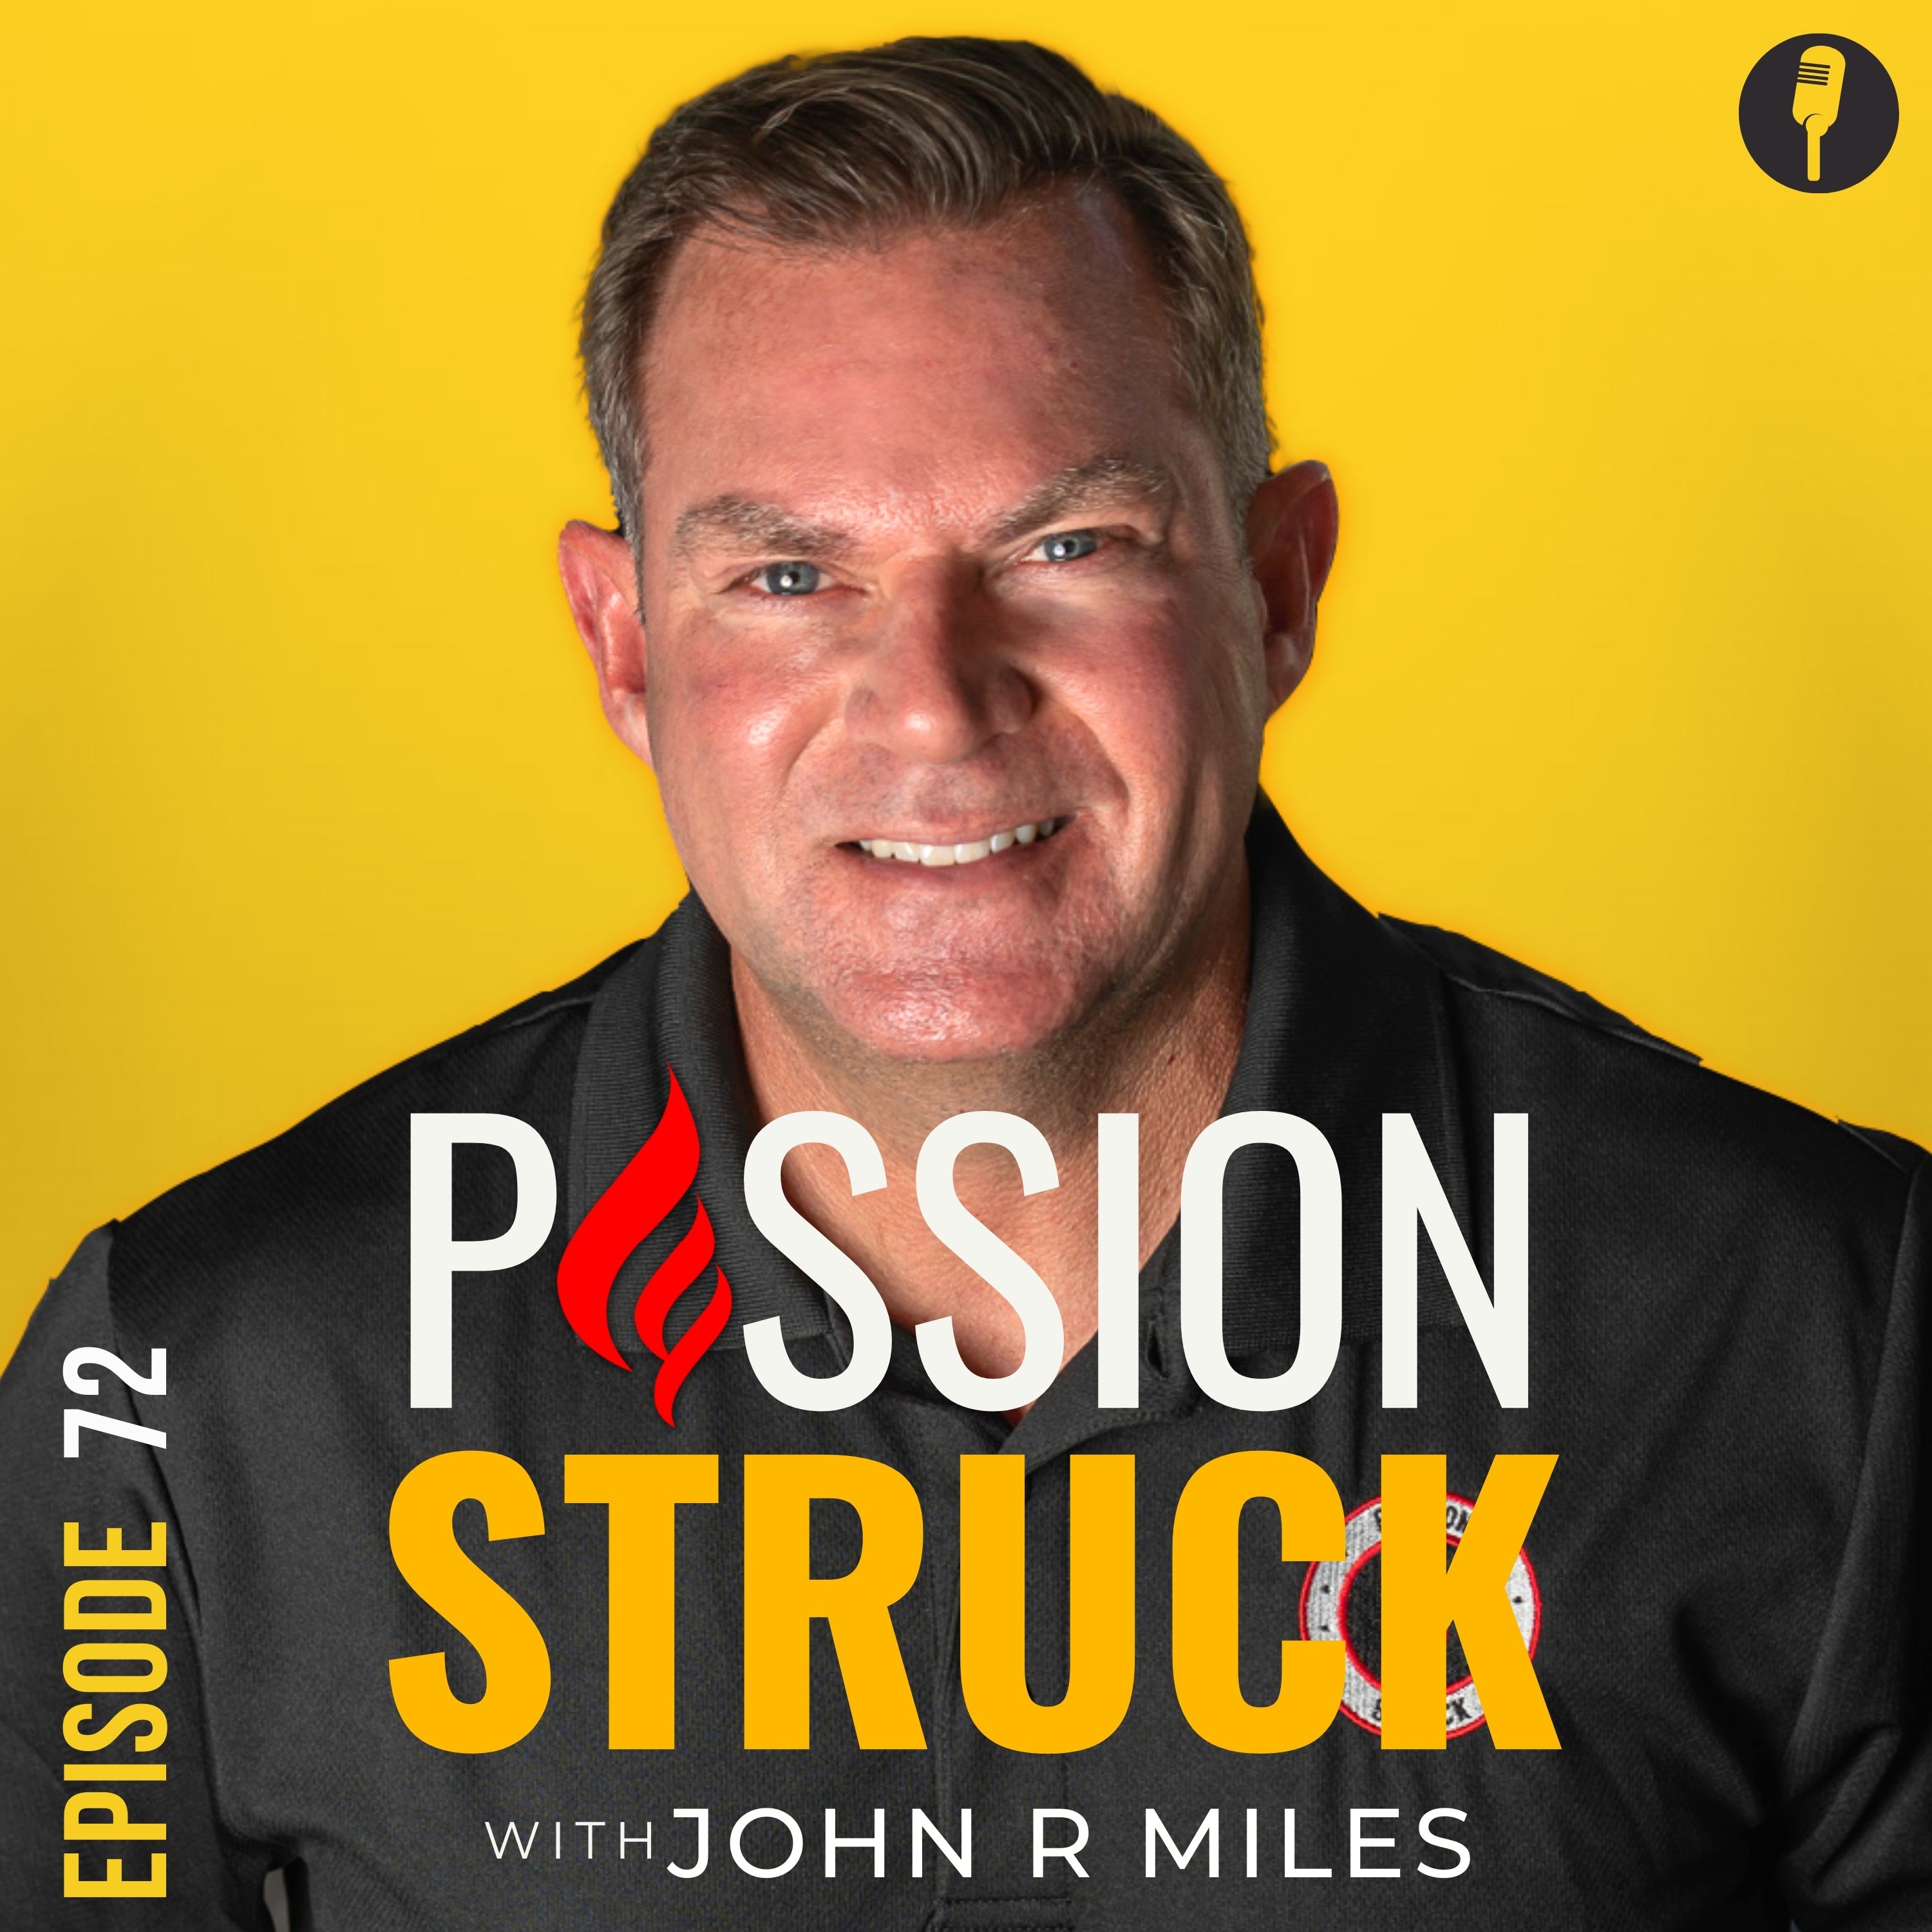 Passion Struck Podcast Cover for Episode 72 with John R Miles